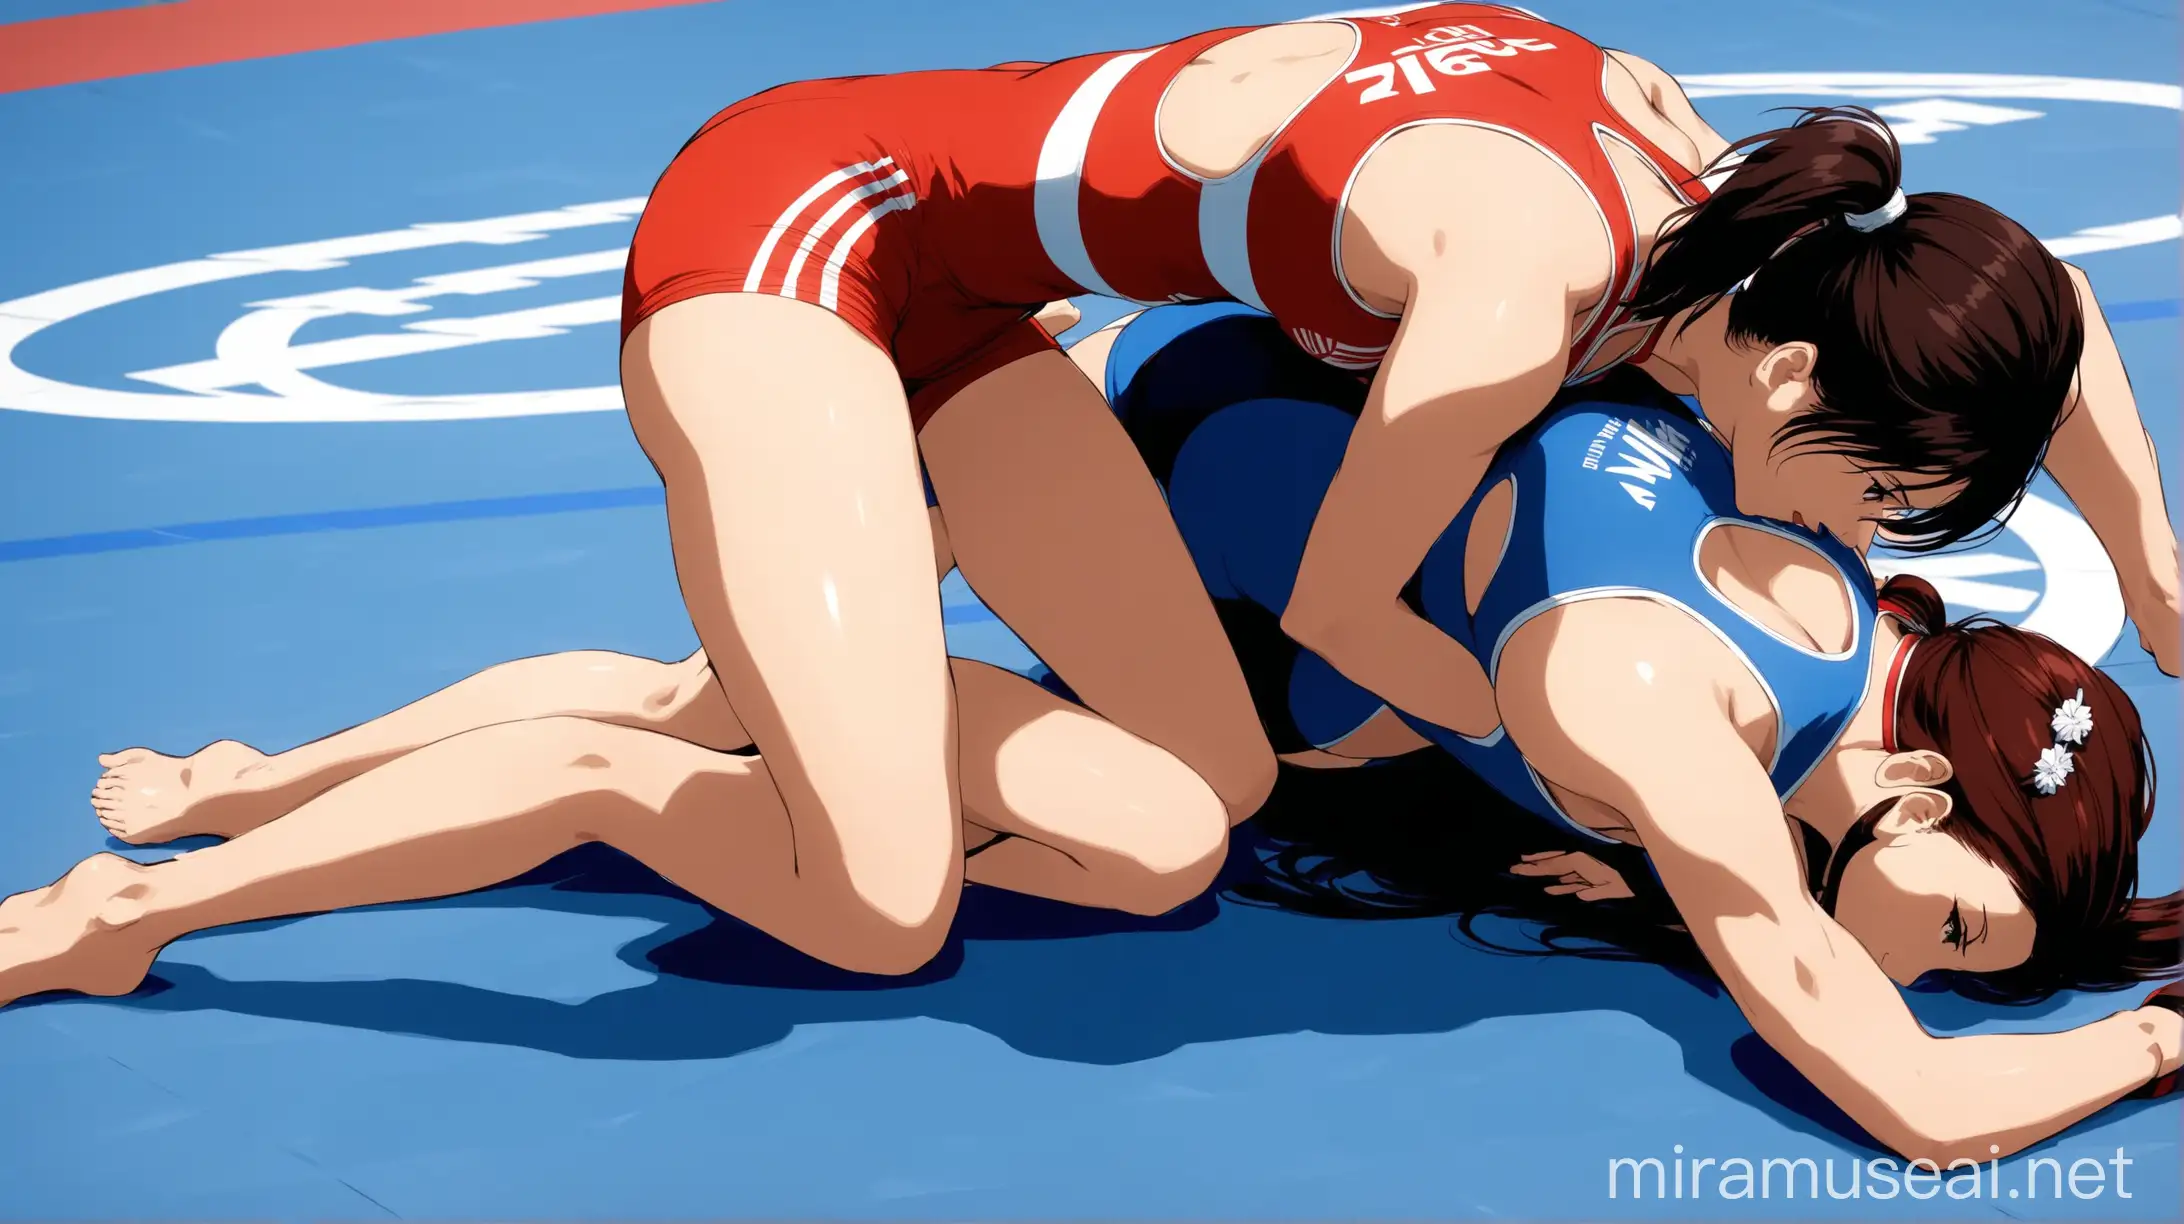 Female Freestyle Wrestling Athletes Grappling at Venue